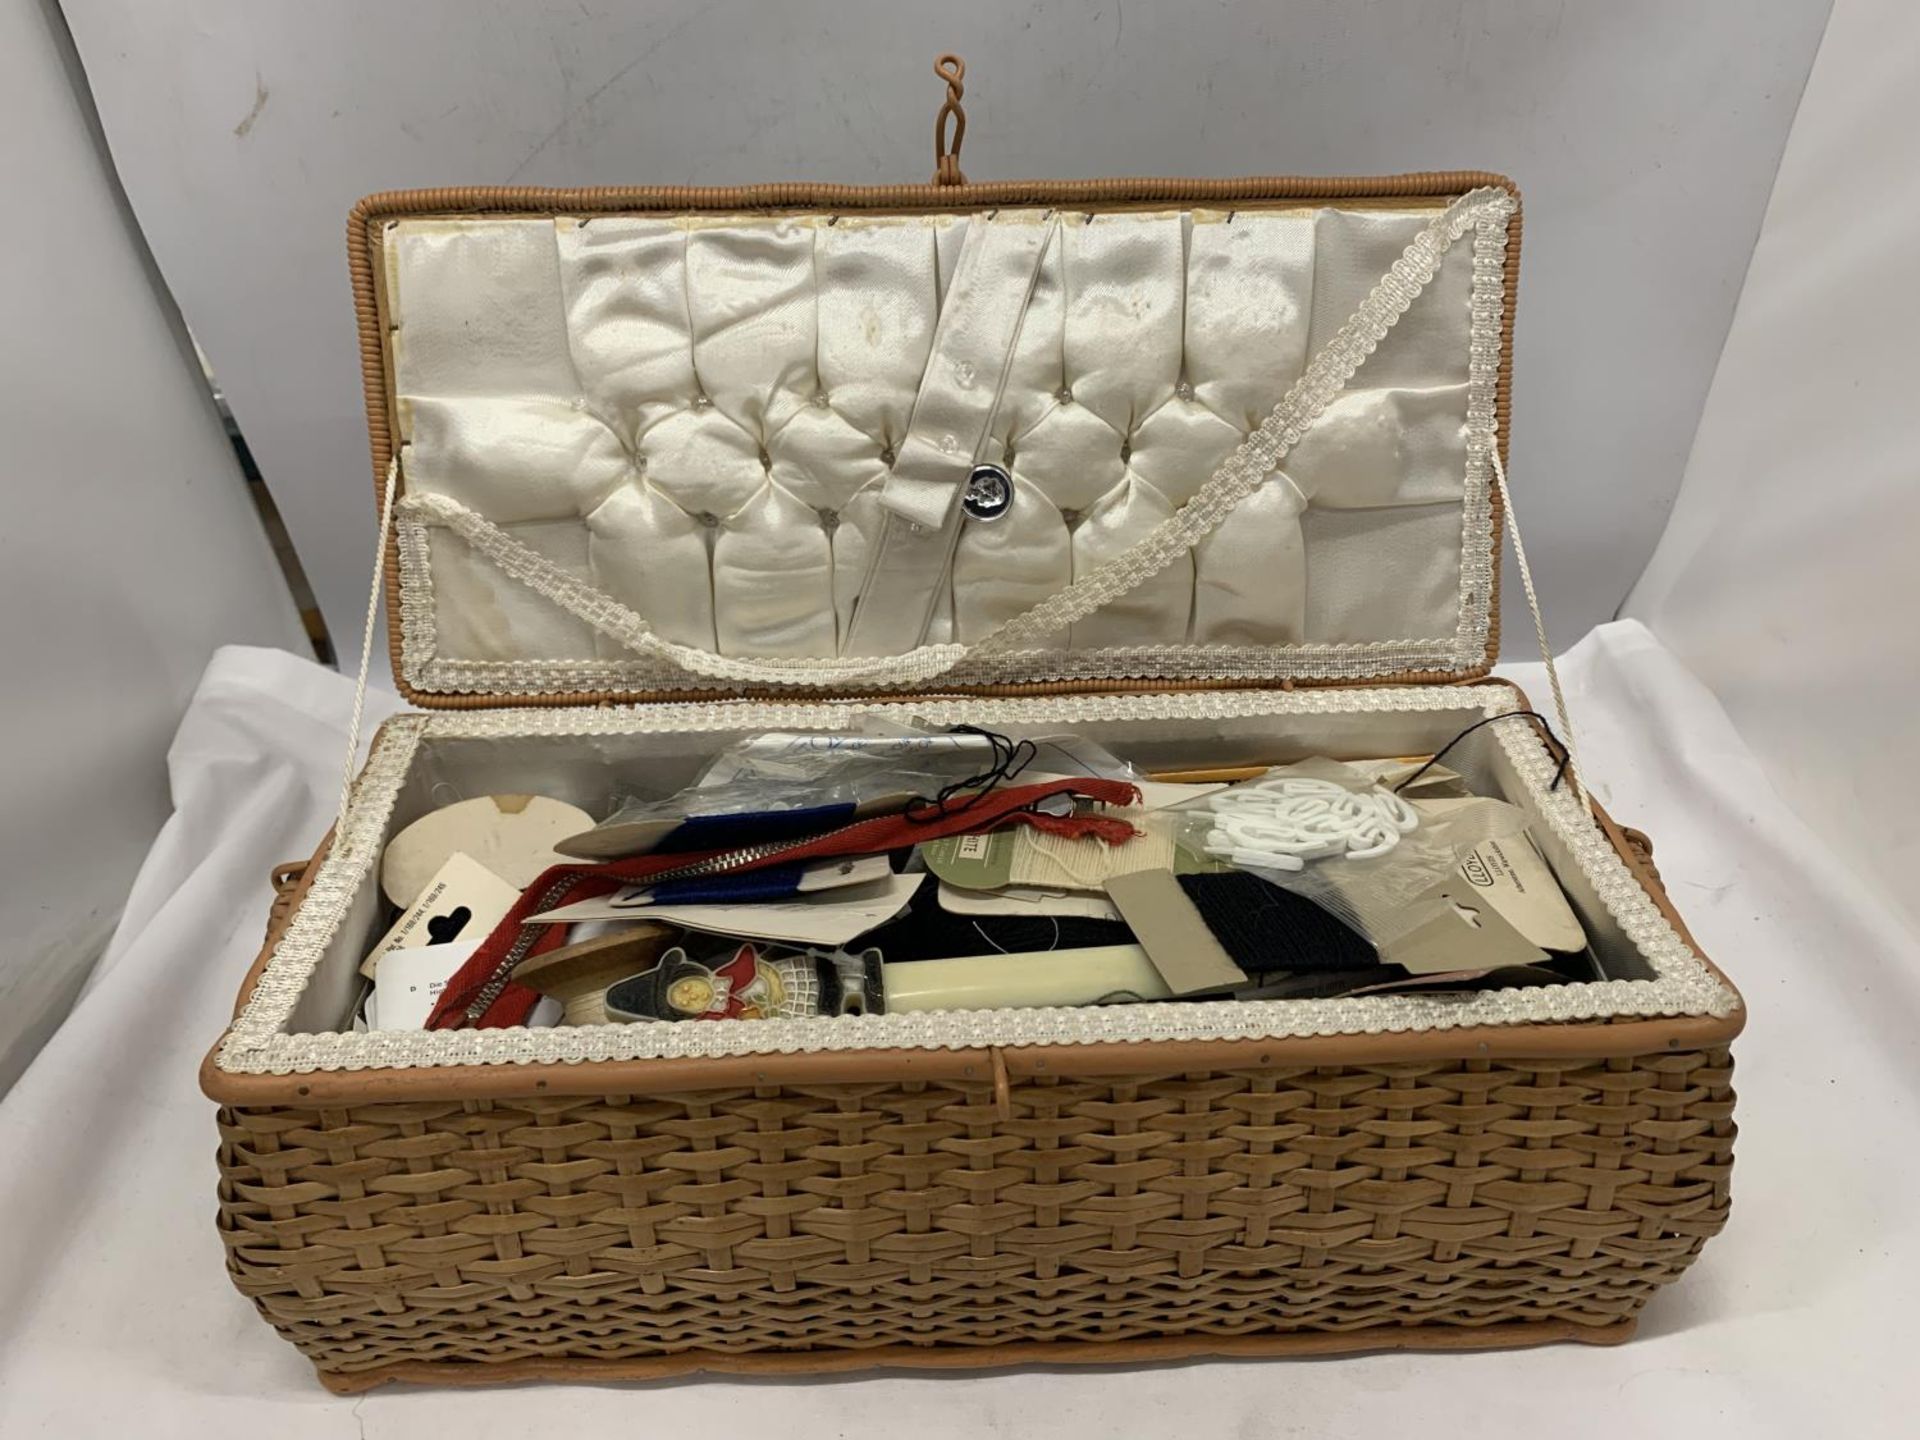 A VINTAGE SEWING BASKET WITH CONTENTS - Image 2 of 4